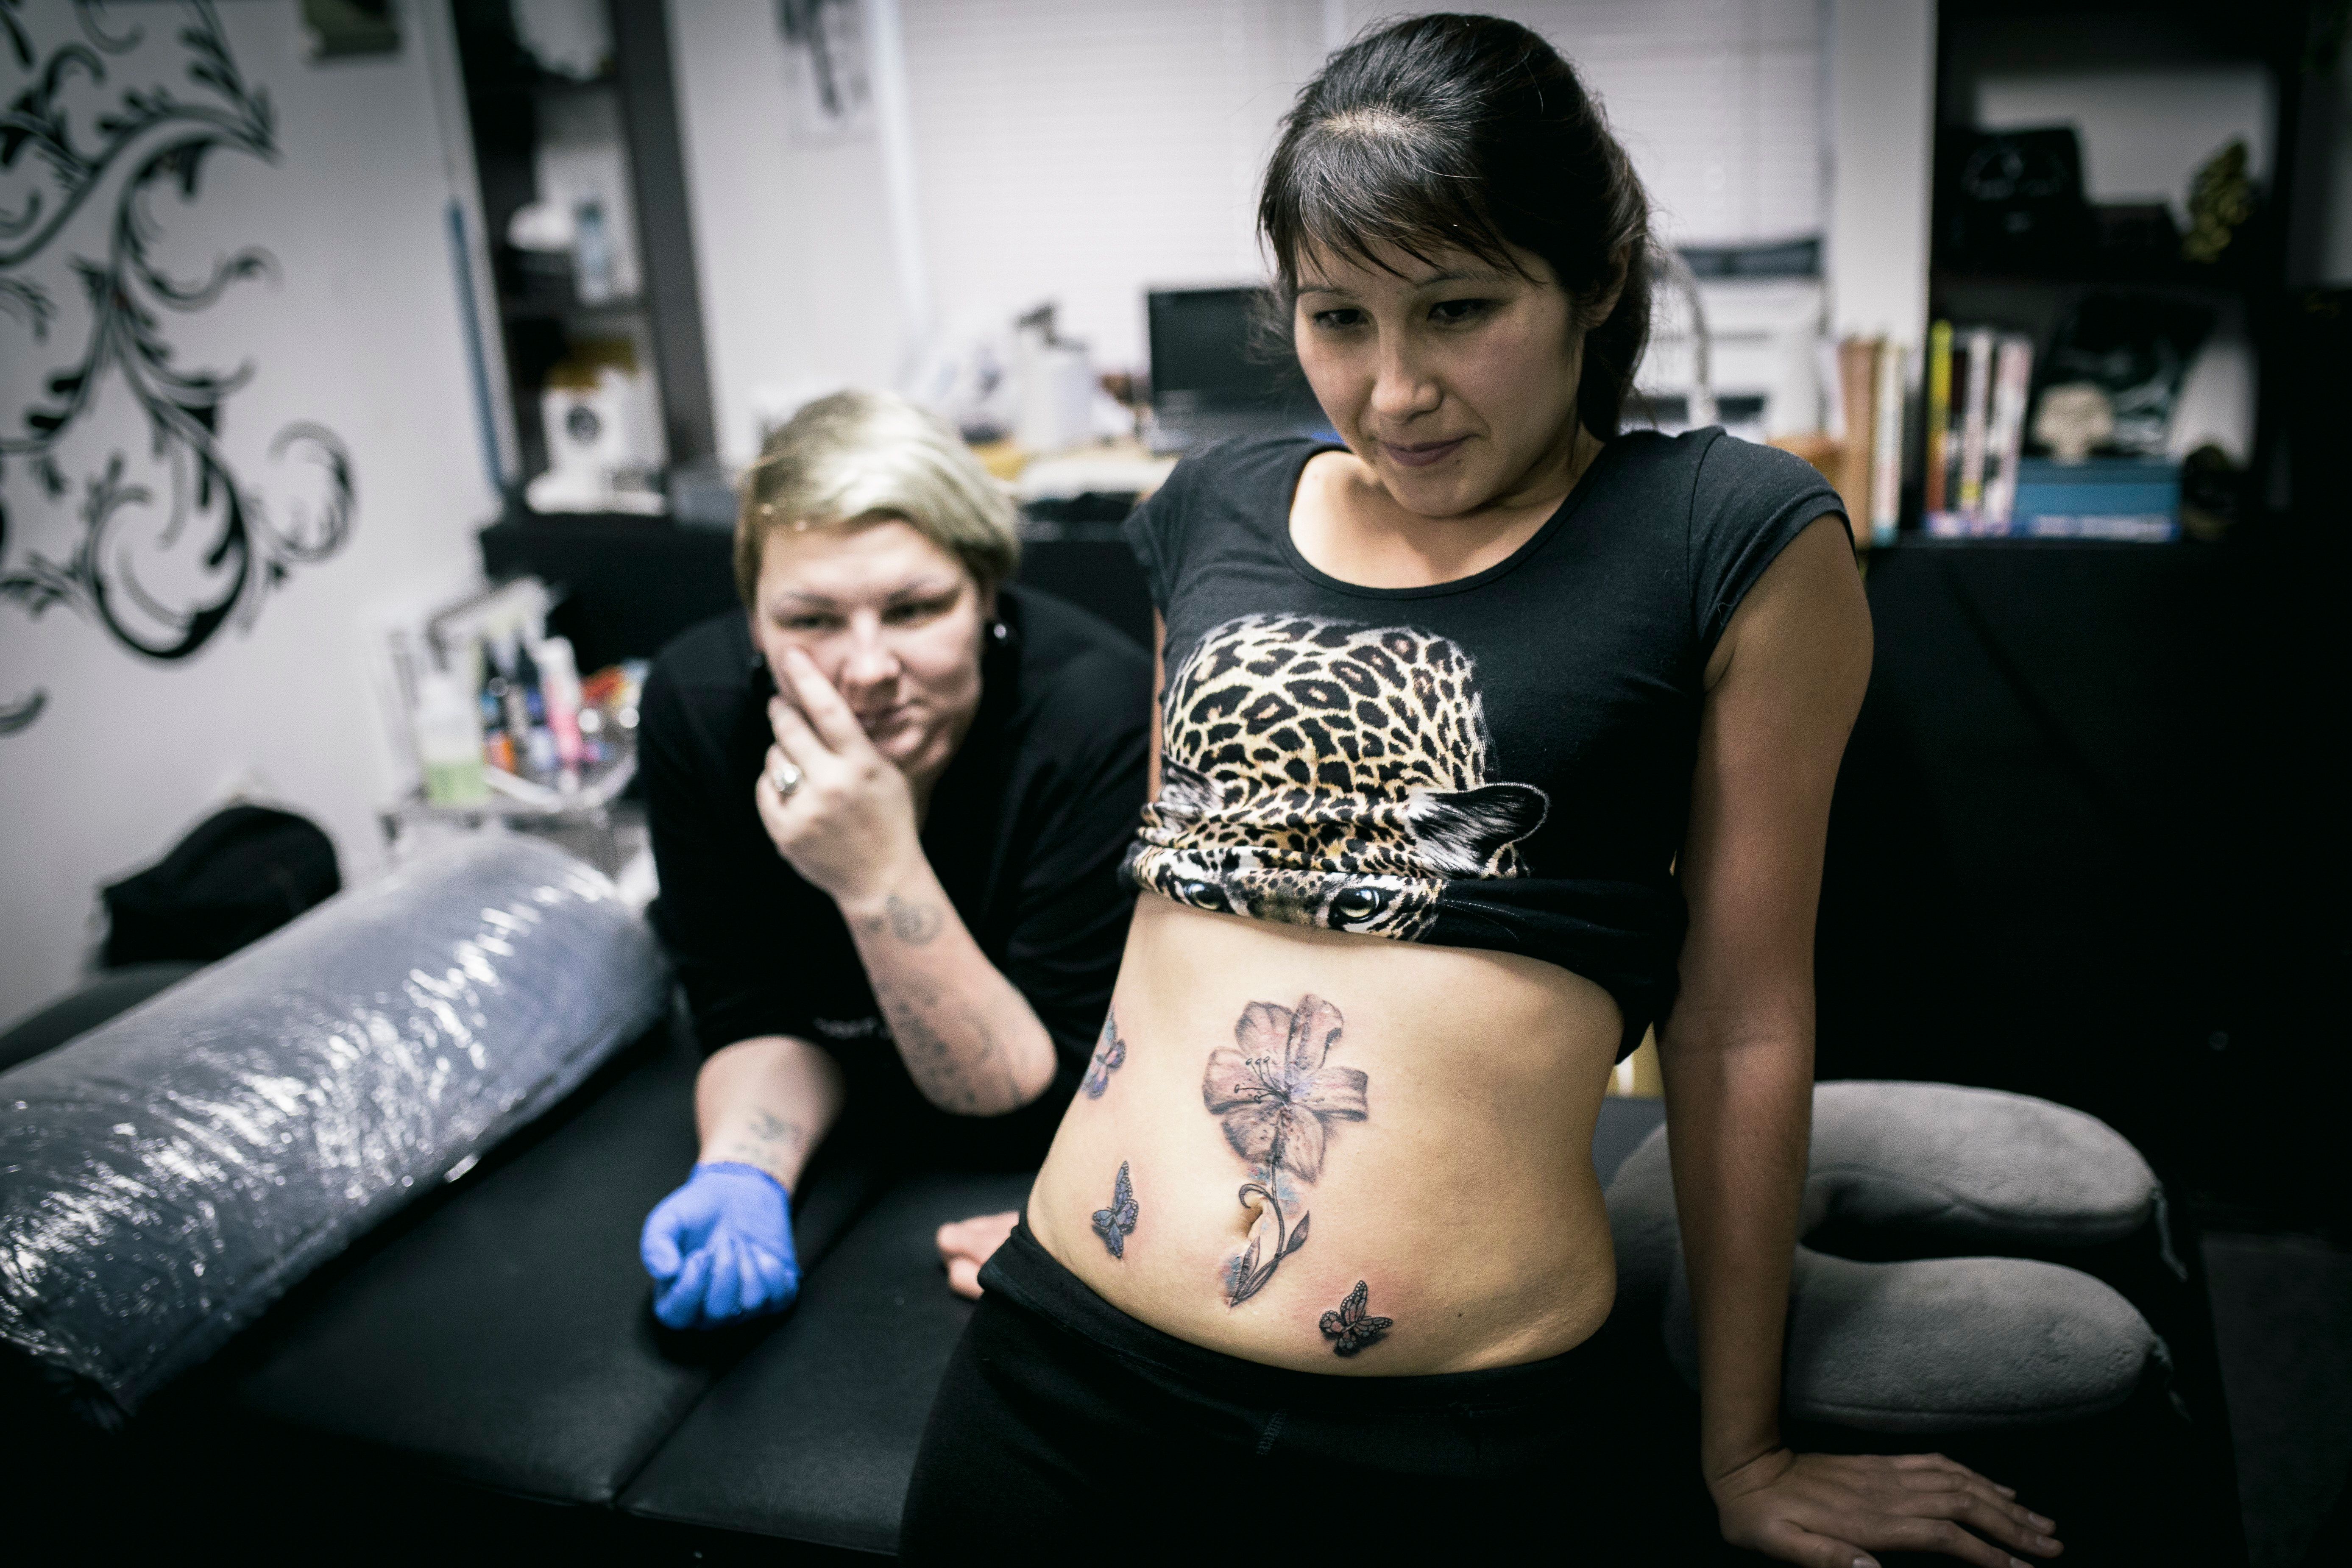 Russian tattoo artist turns abuse scars into butterflies | The Seattle Times